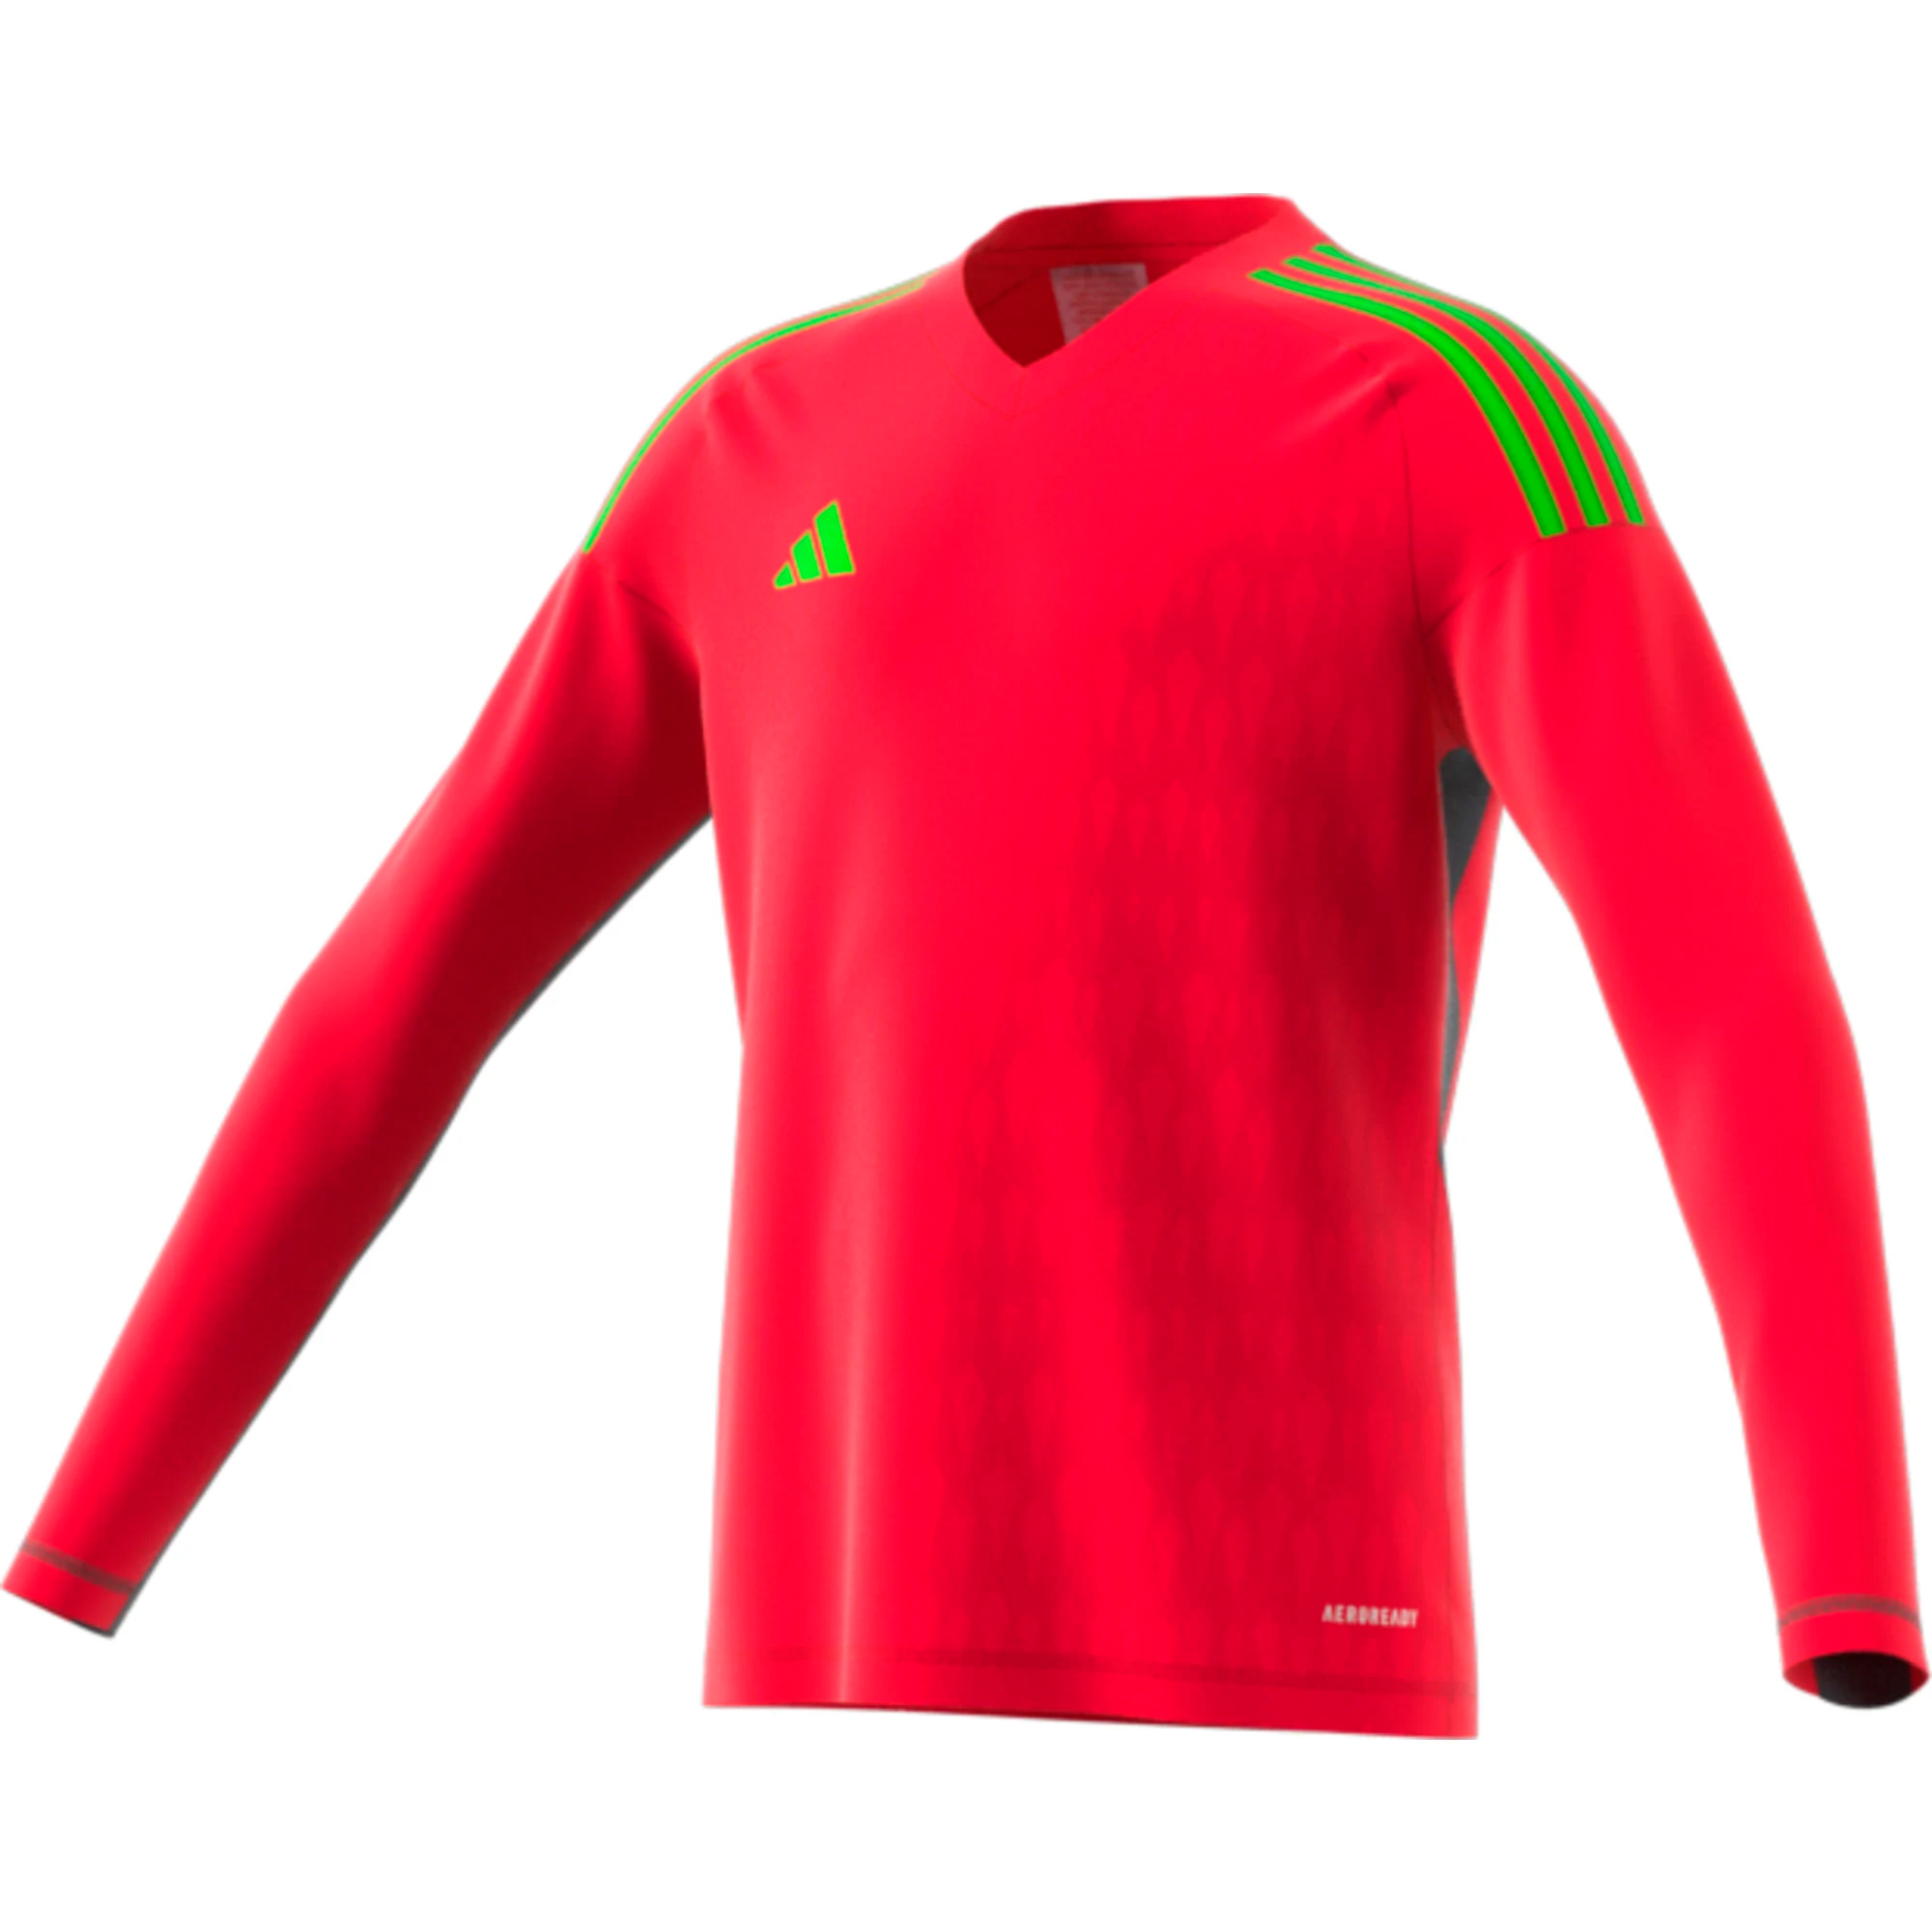 ADIDAS T23 COMPETITION GK JERSEY LS YOUTH TEAM CORE RED